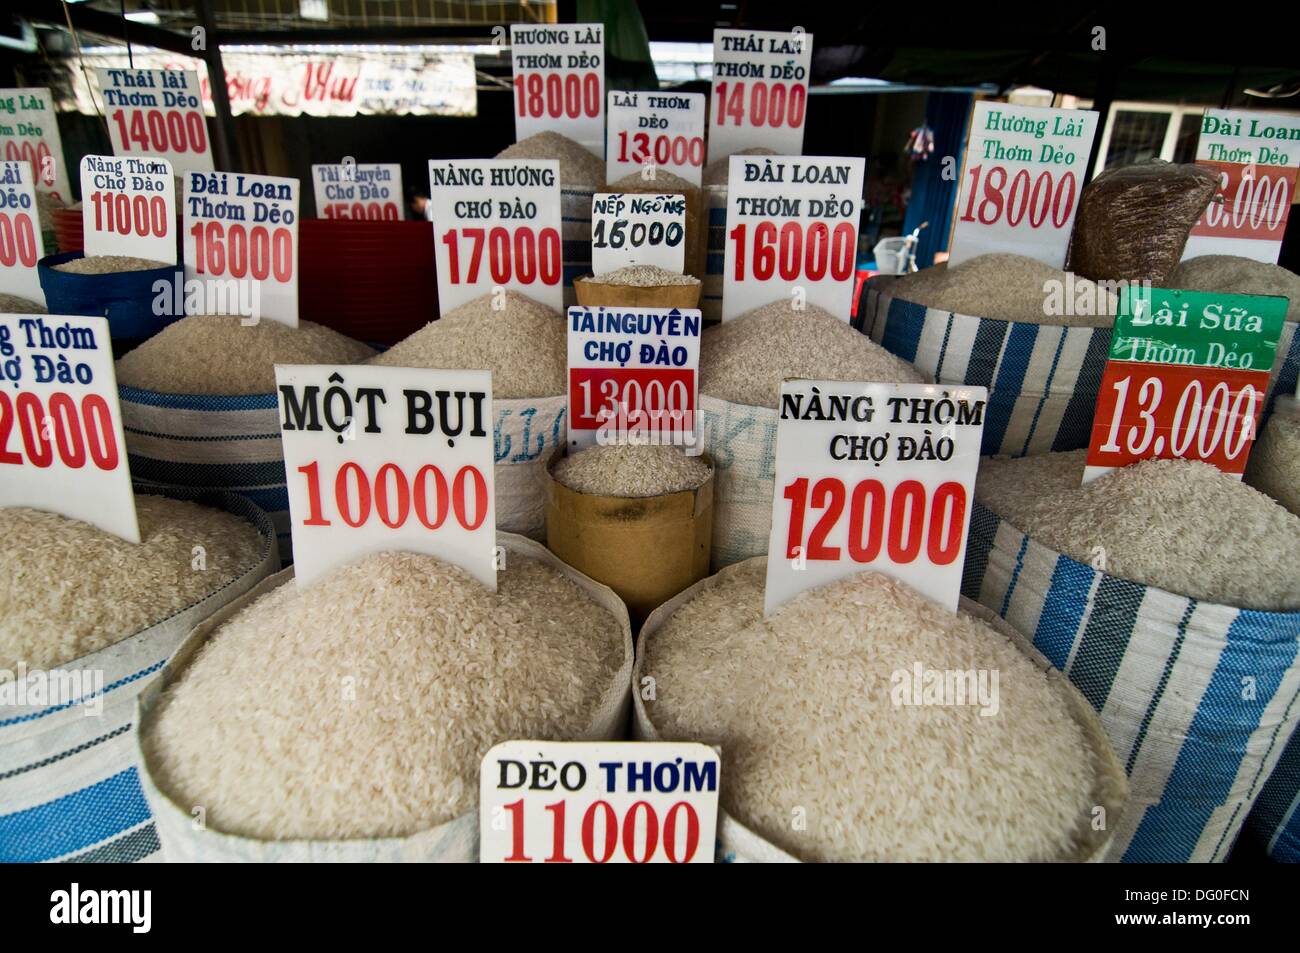 large varieties of rice in a small market shop in Saigon. Stock Photo